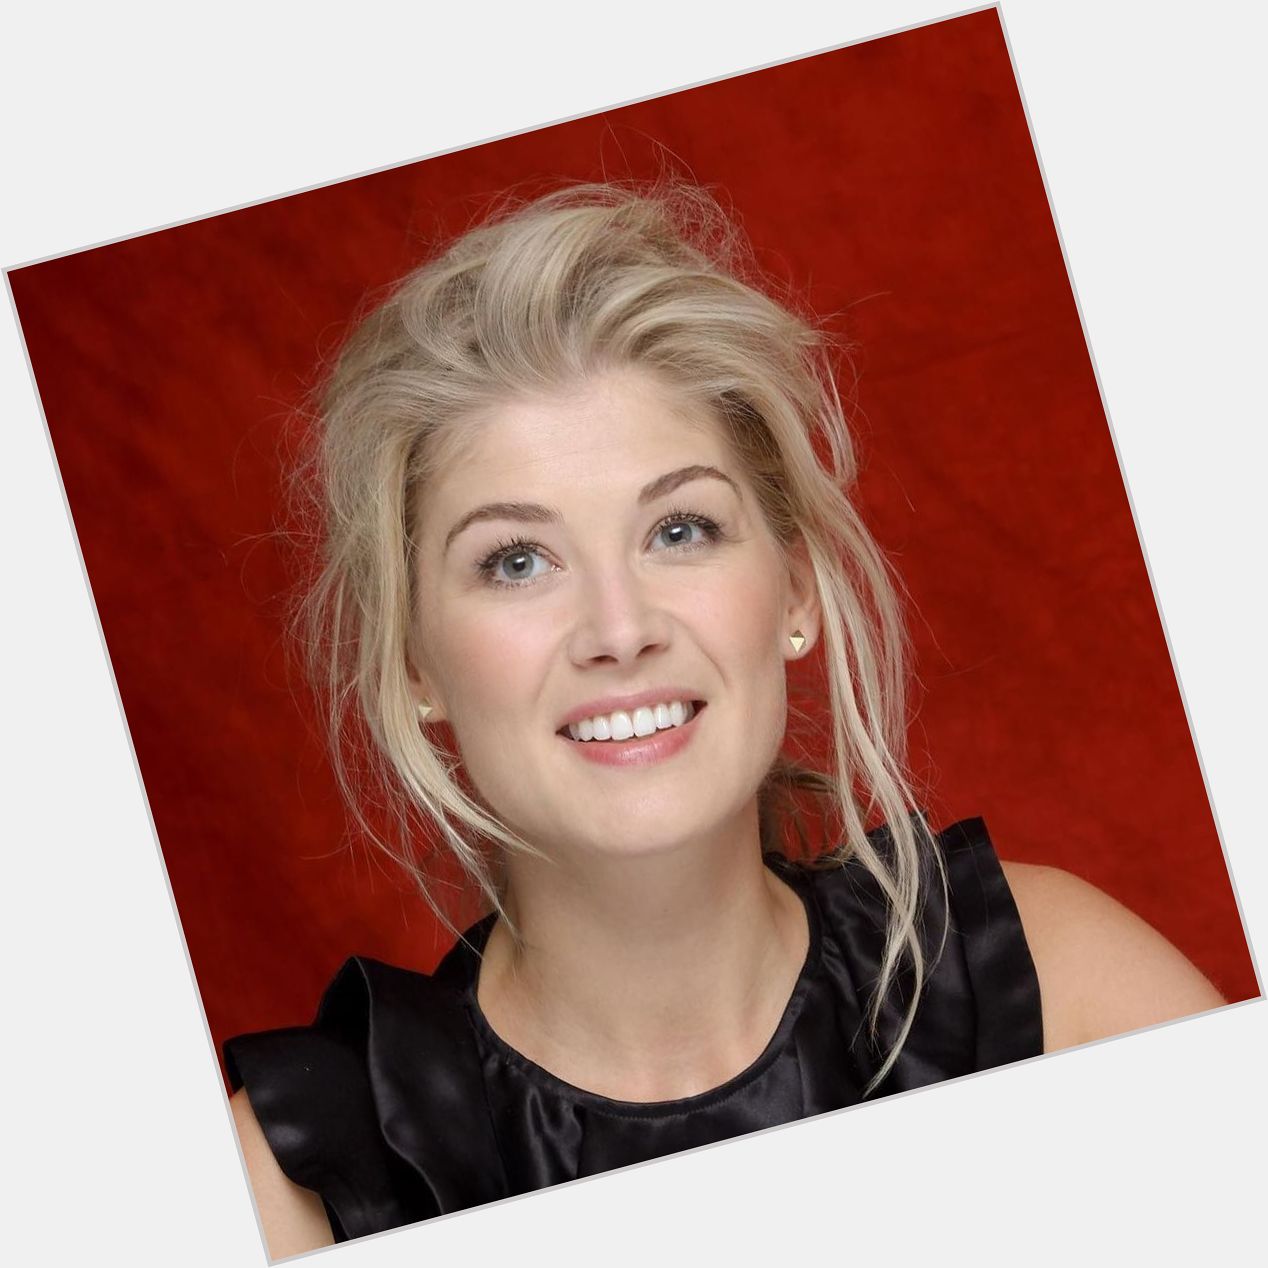 Another birthday today......Wishing a very happy birthday to the very lovely Rosamund Pike! 